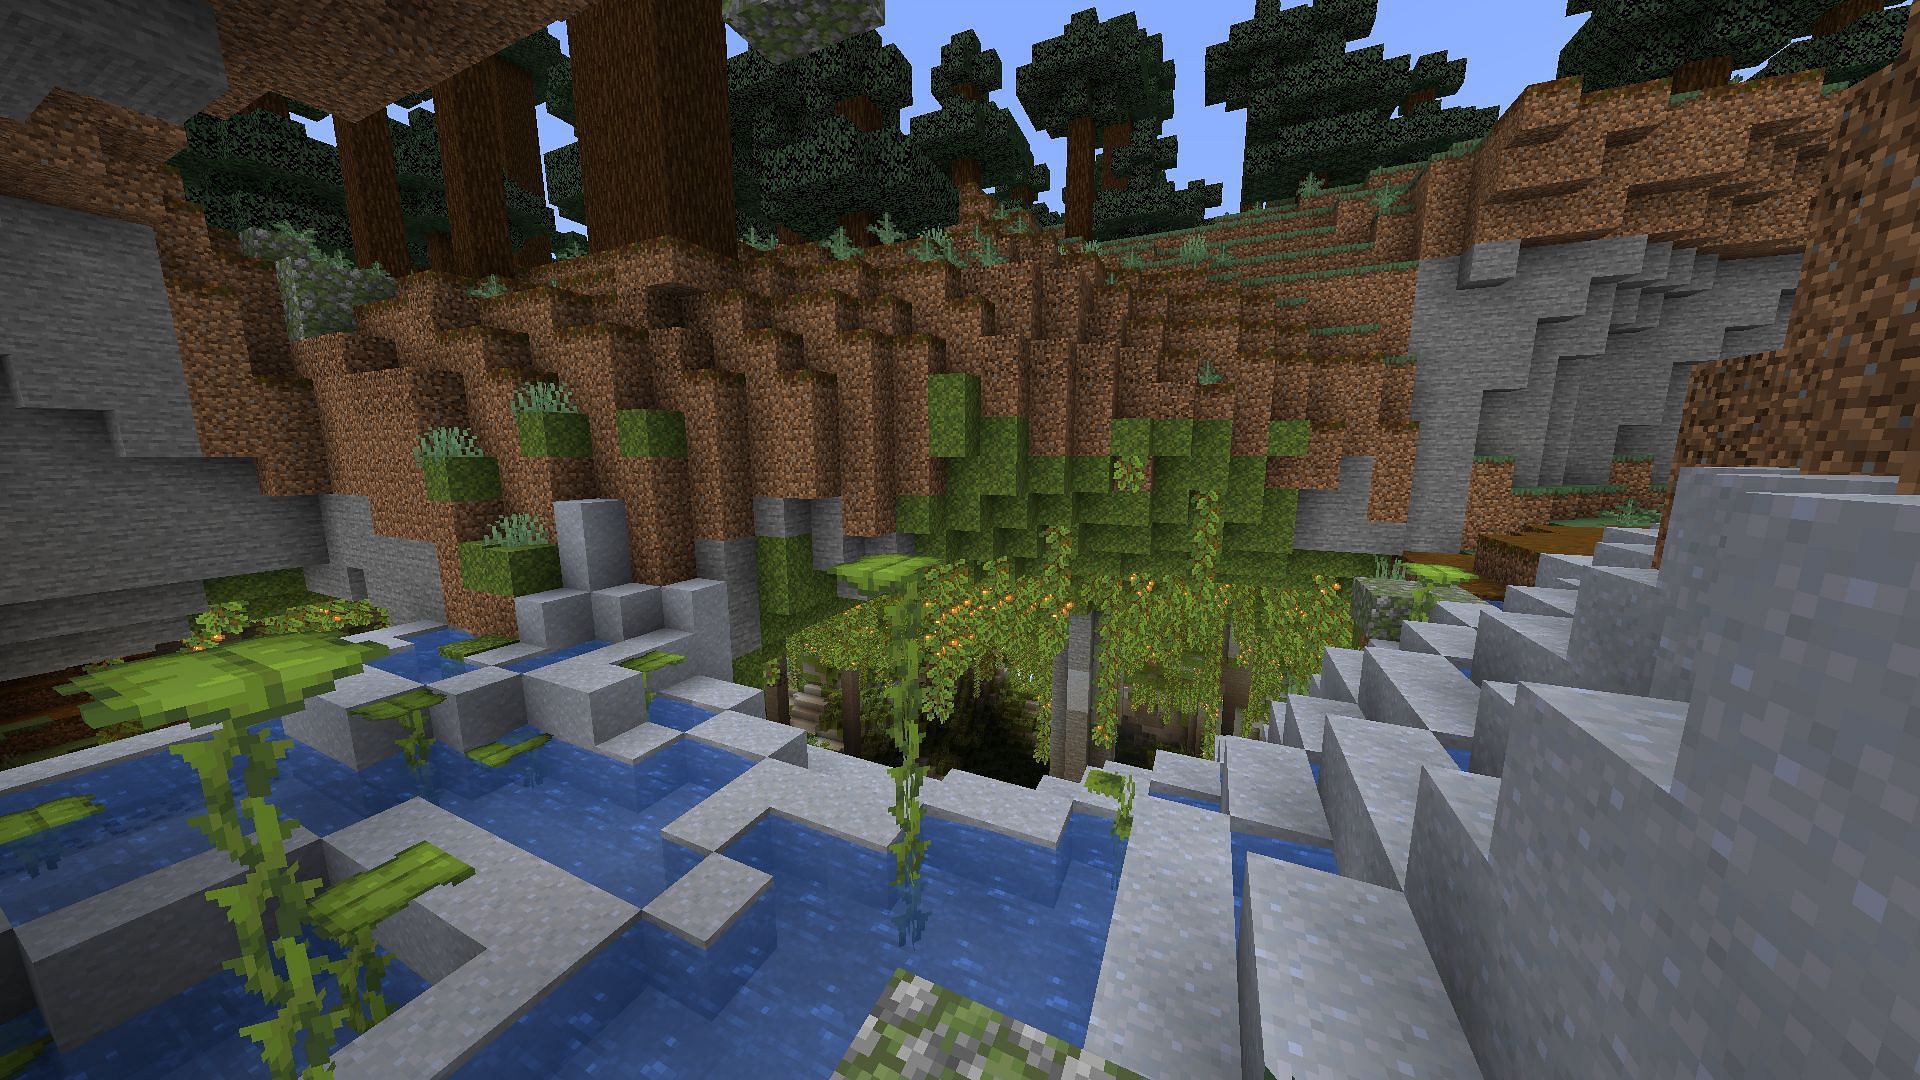 Lush caves in Minecraft 1.18 pre-release 5 (Image via Minecraft)